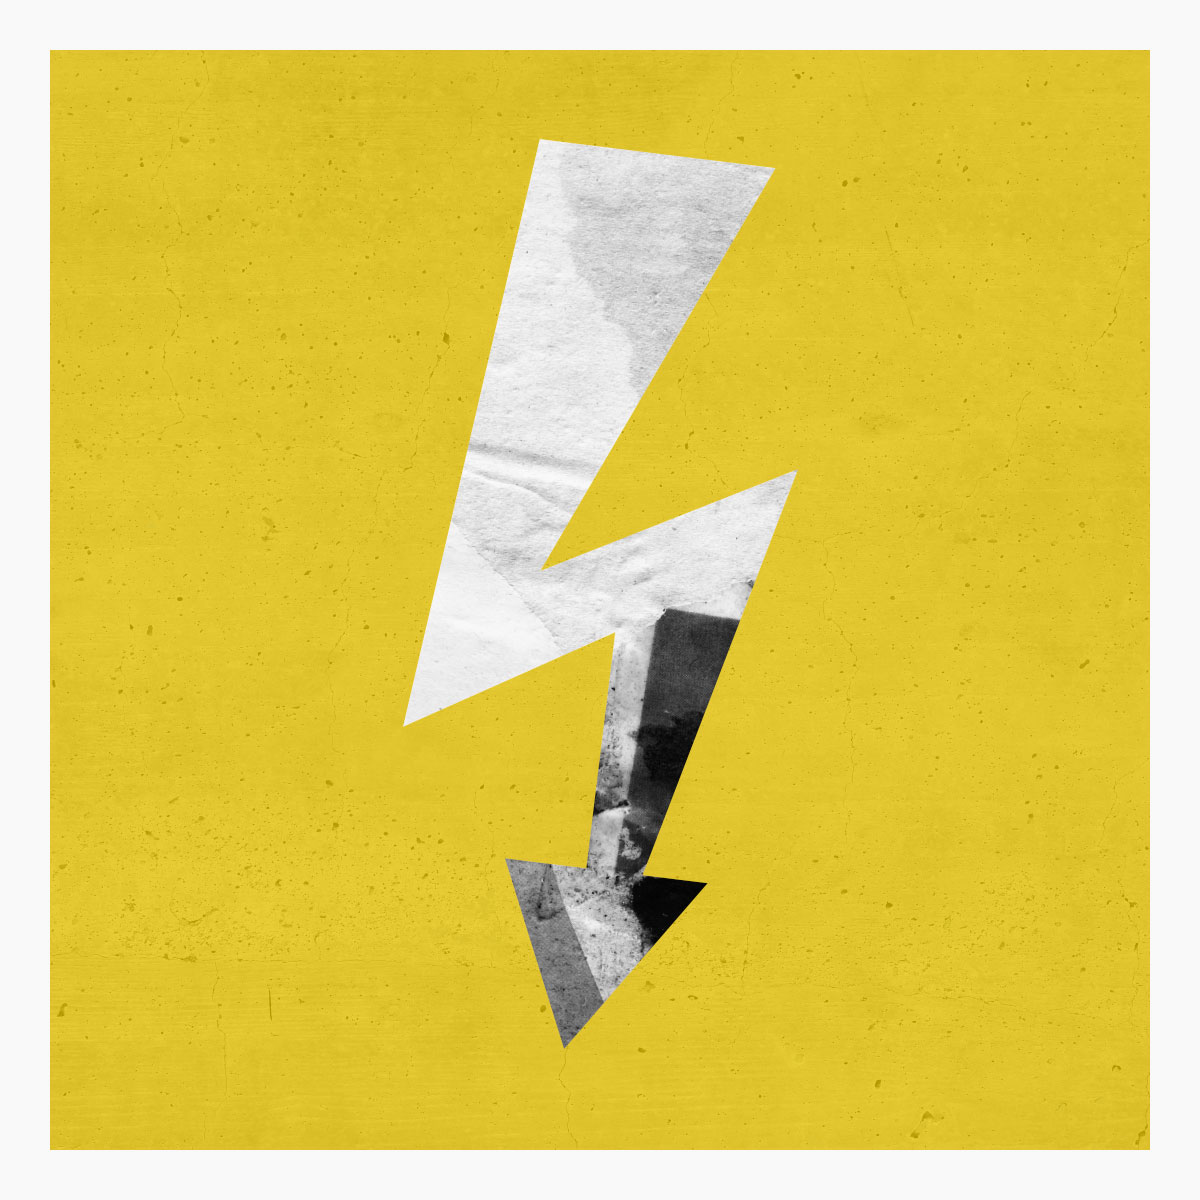 Spark of Inspiration. Lightning bolt made out of graffiti paper on yellow concrete wall.